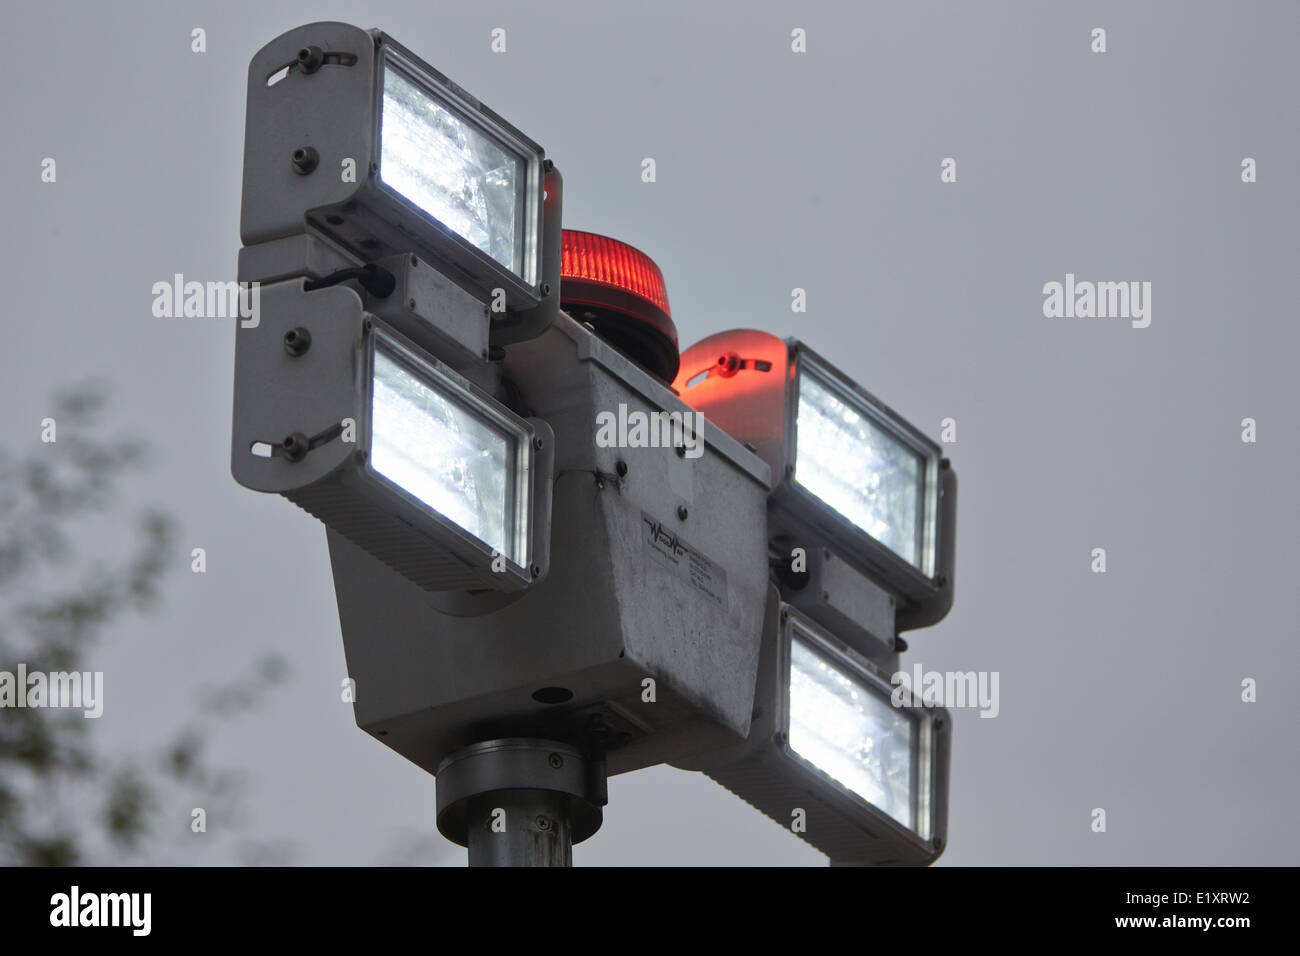 Floodlights installed on a fire engine Stock Photo